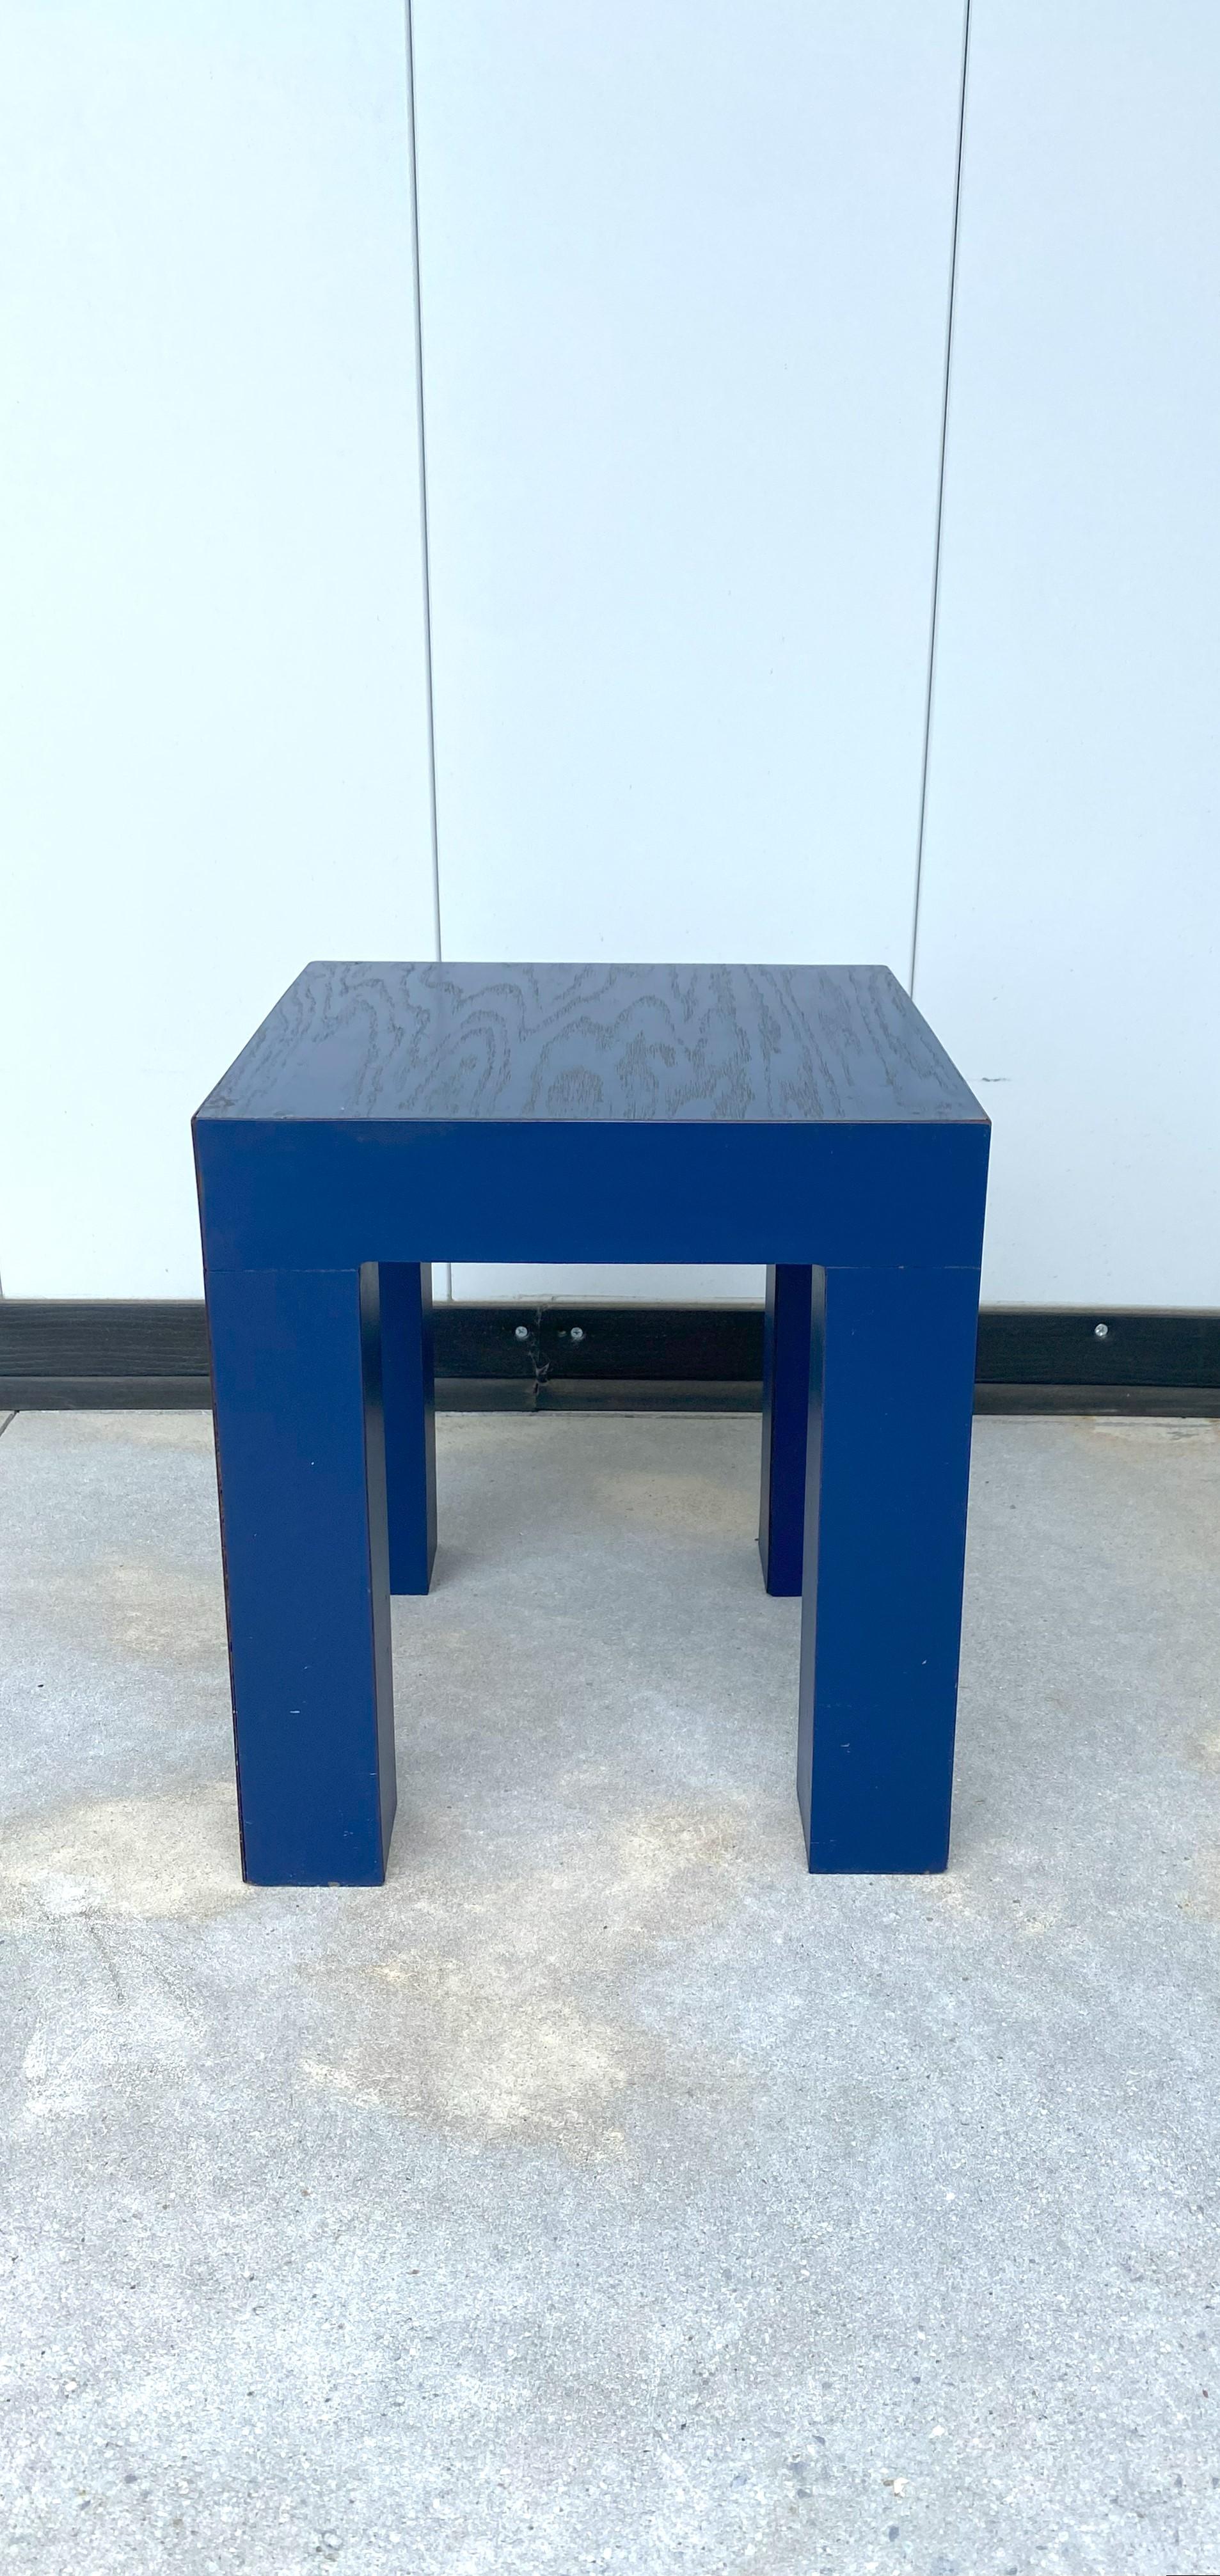 A cool, chic, small royal blue side/end/drinks table, Postmodern period, Memphis style, after designer Marco Zanini, circa late-20th century, 1980s. A monochromatic table in wood and blue laminate veneer. Table's top is raw wood with a royal blue